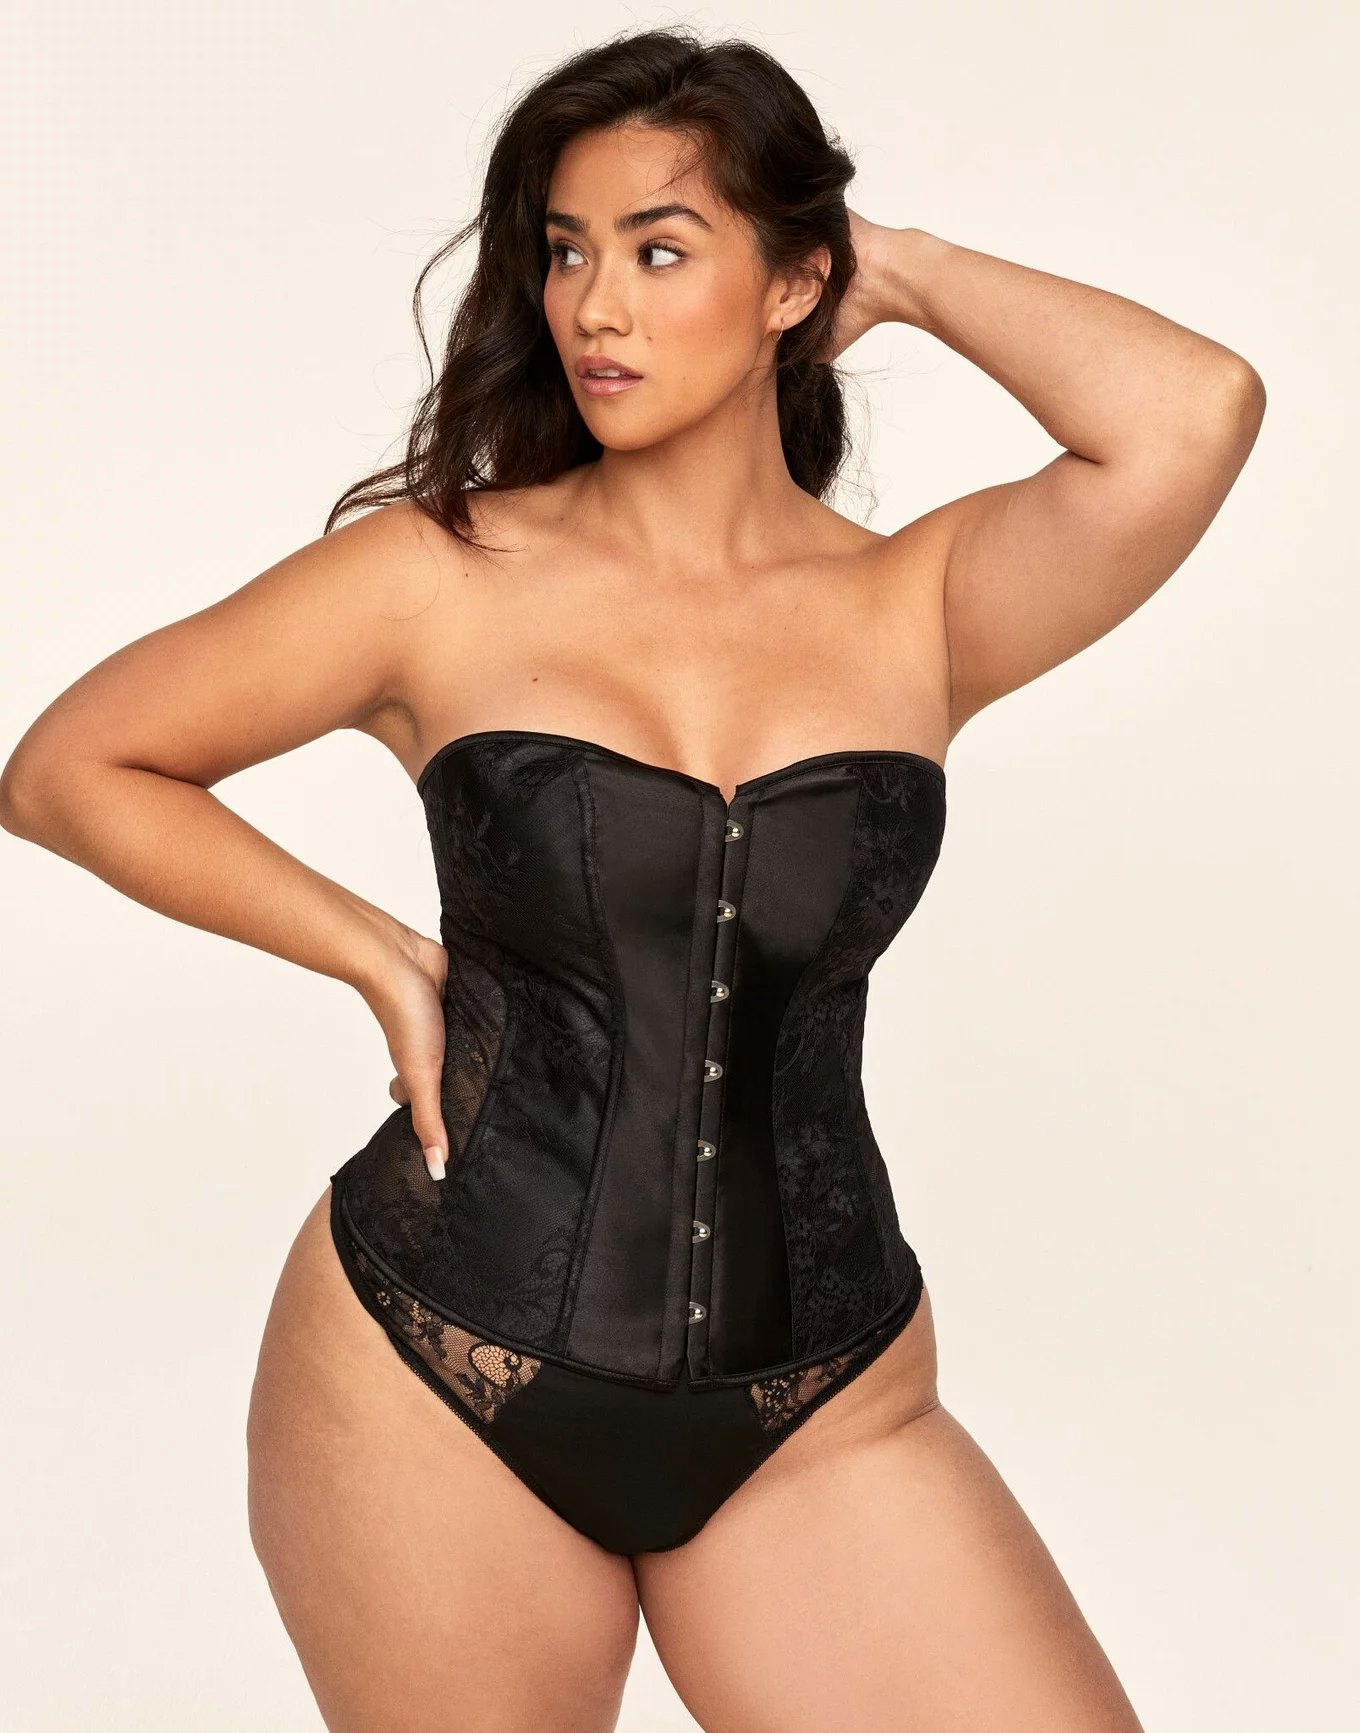 14 Corsets For Big Boobs That Won't Smash Your Chest